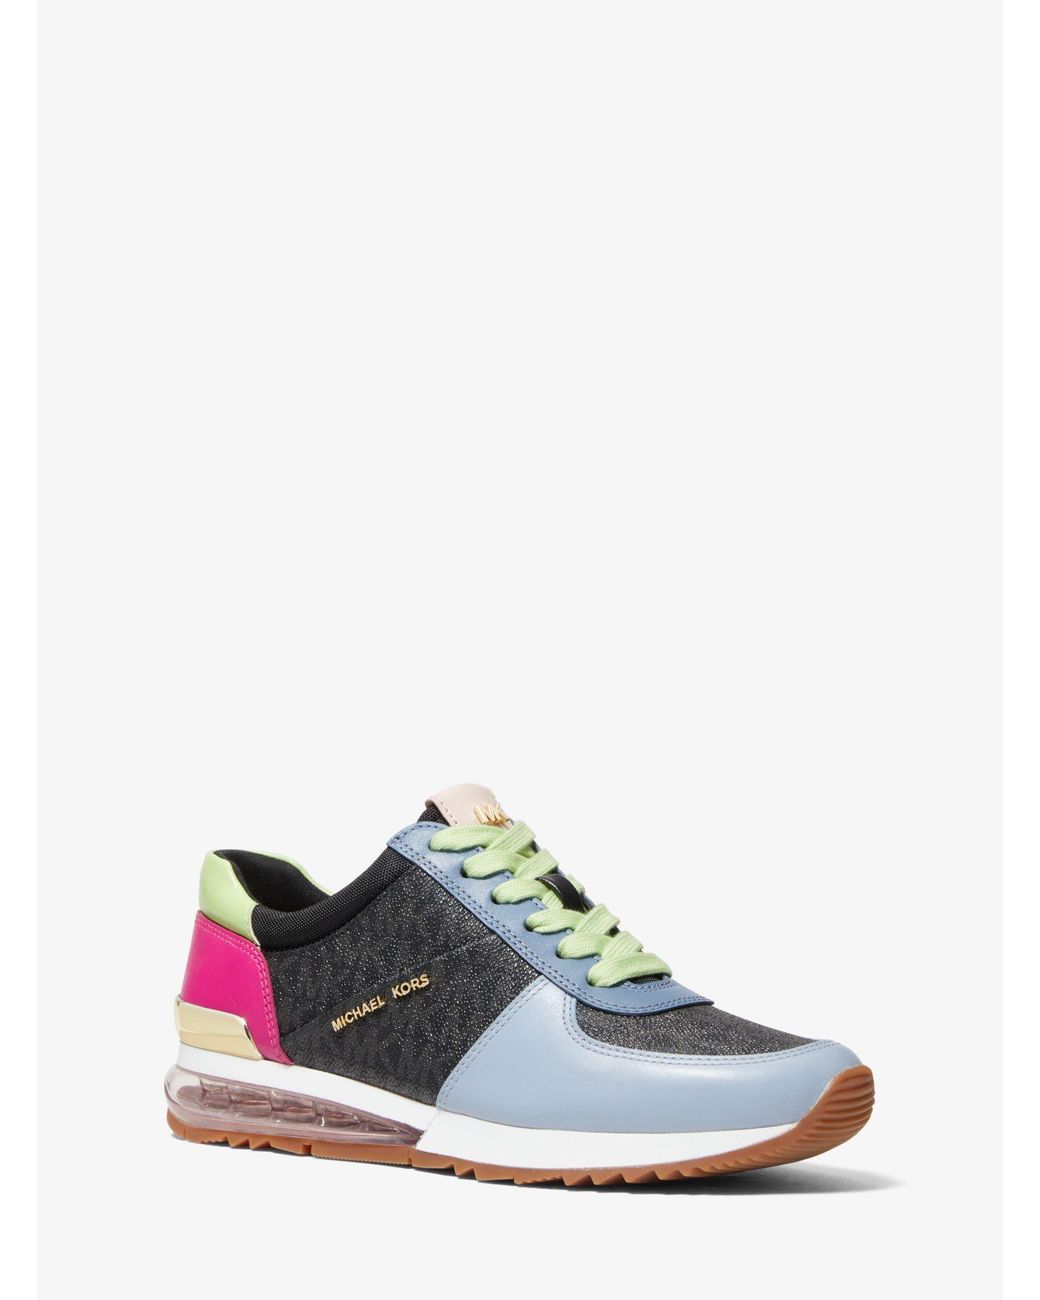 Michael Kors Allie Extreme Color-block Leather And Logo Trainer | Lyst